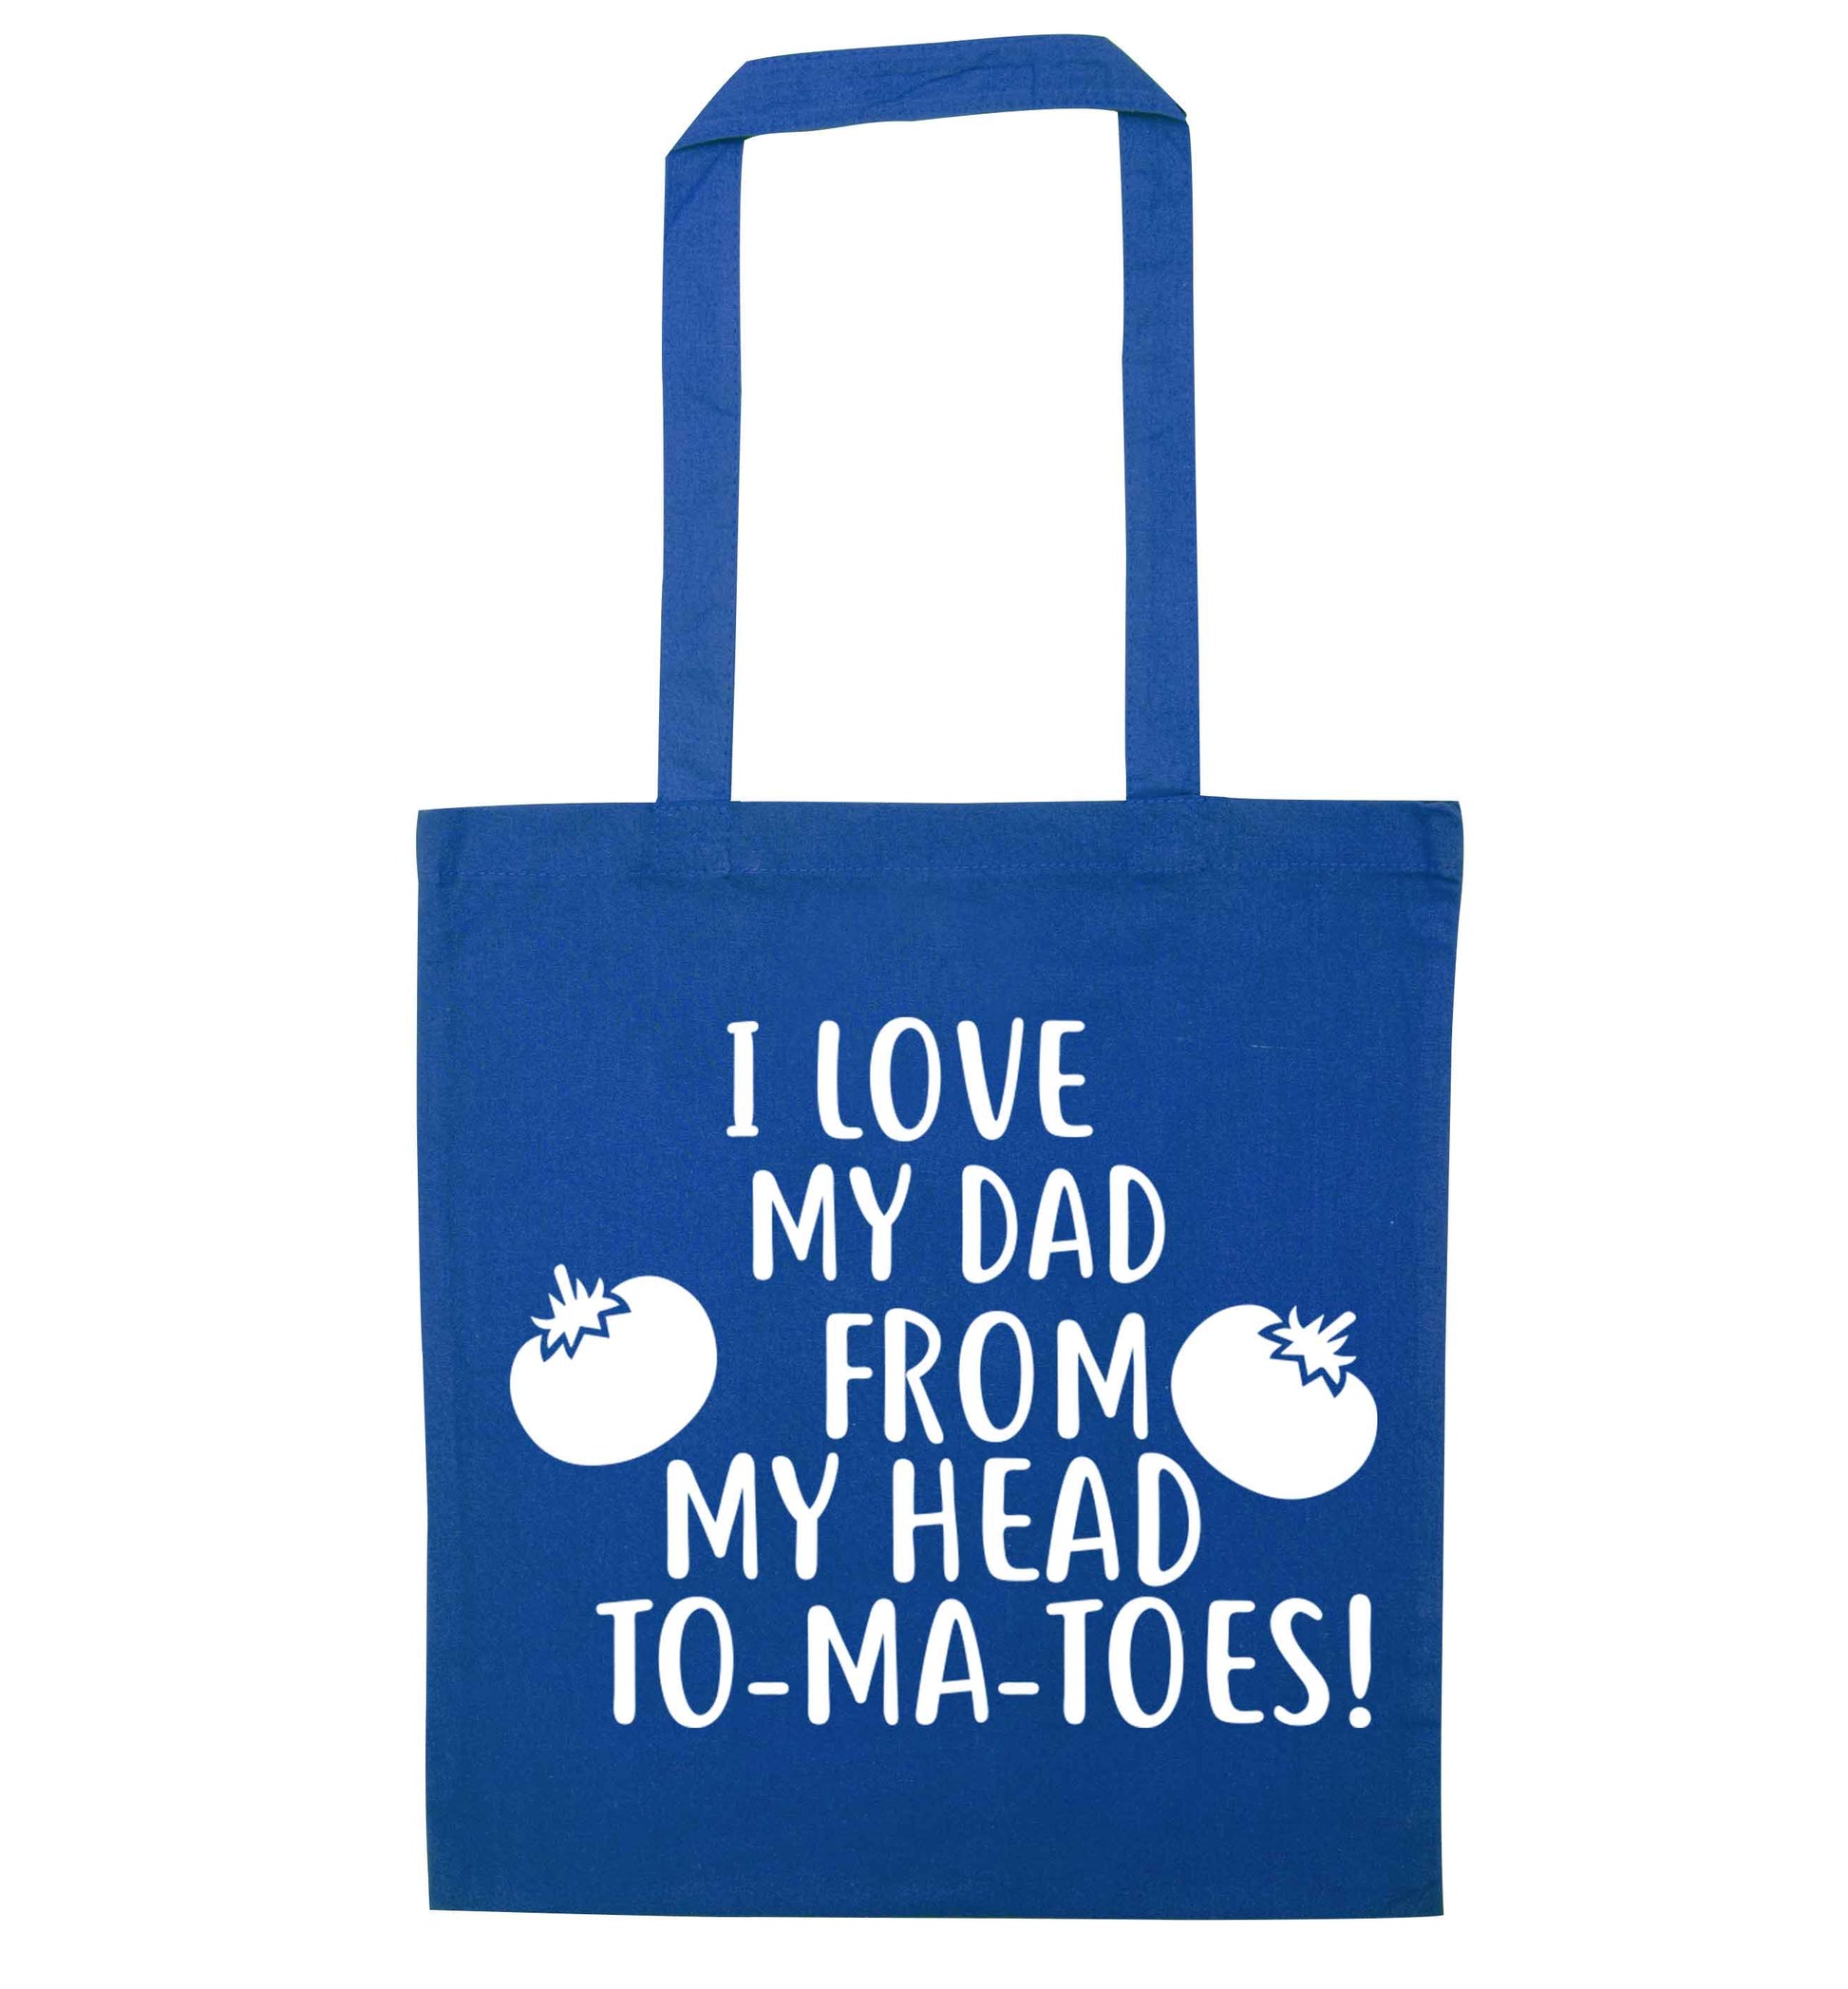 I love my dad from my head to-ma-toes blue tote bag